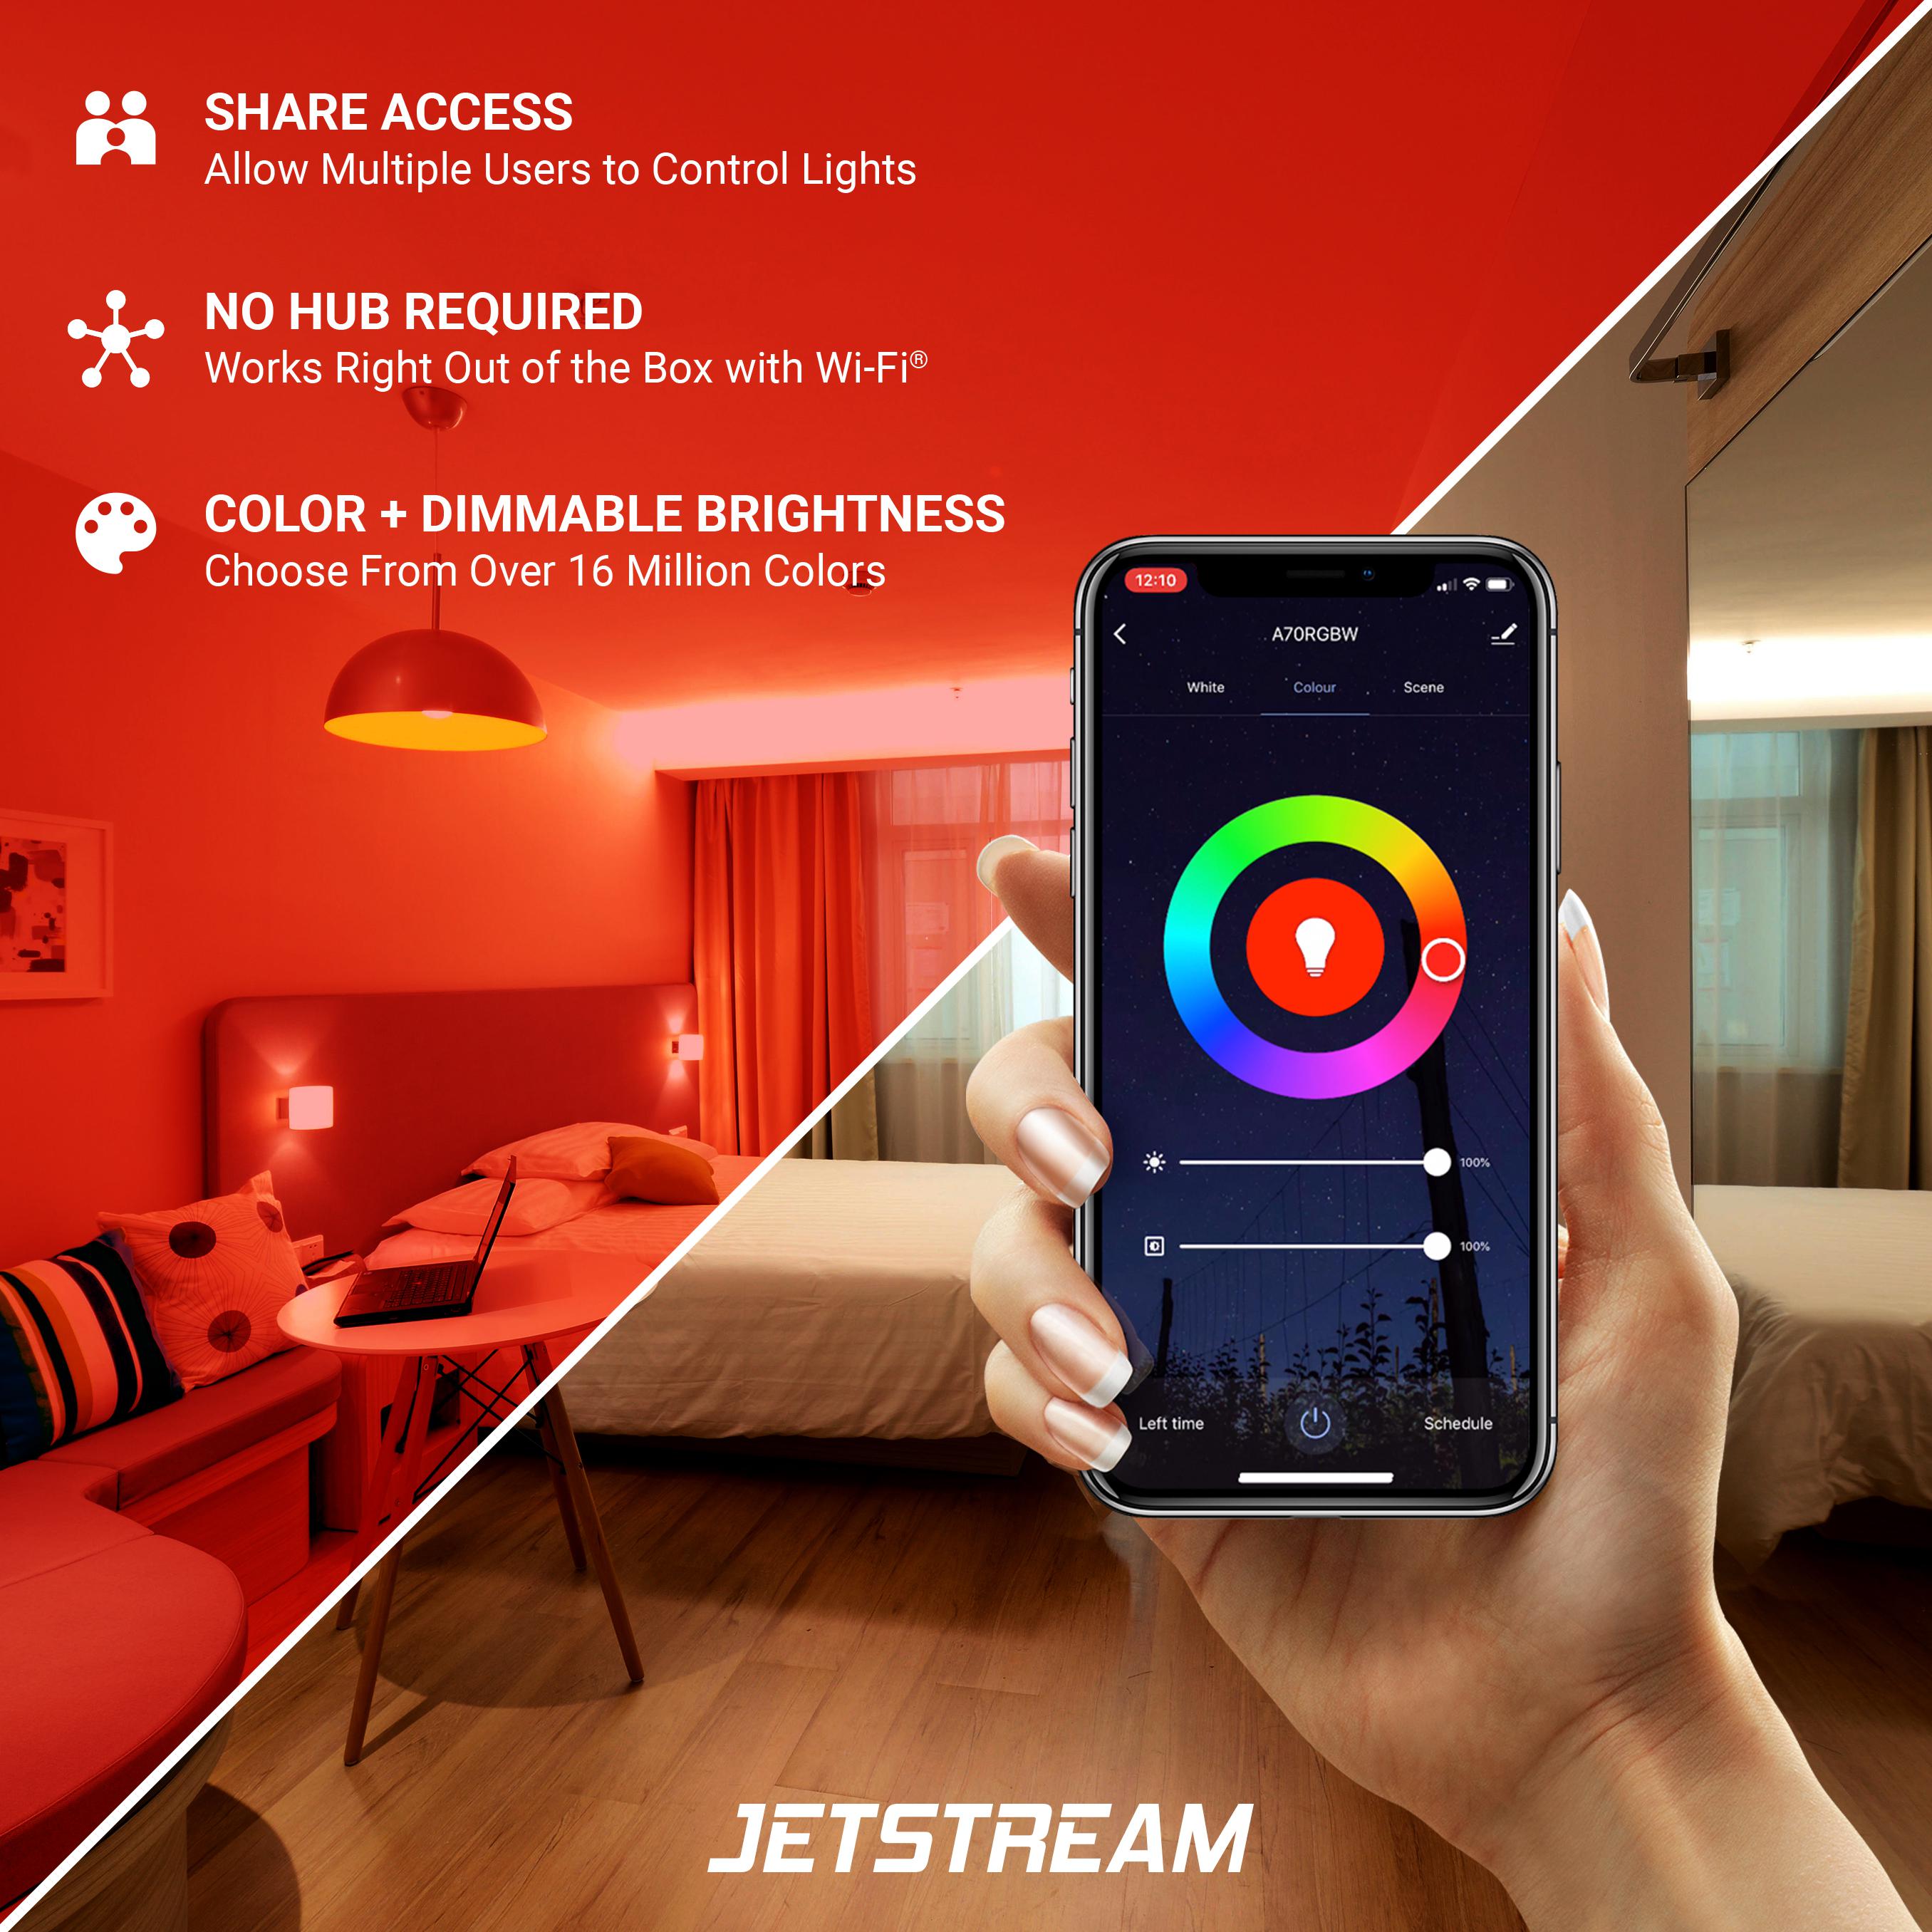 Jetstream Smart Home Bulb Kit: 2 Pack White Smart Bulb + 2 Pack Color Smart Bulb (Works with Google Assistant and Alexa) - image 2 of 10